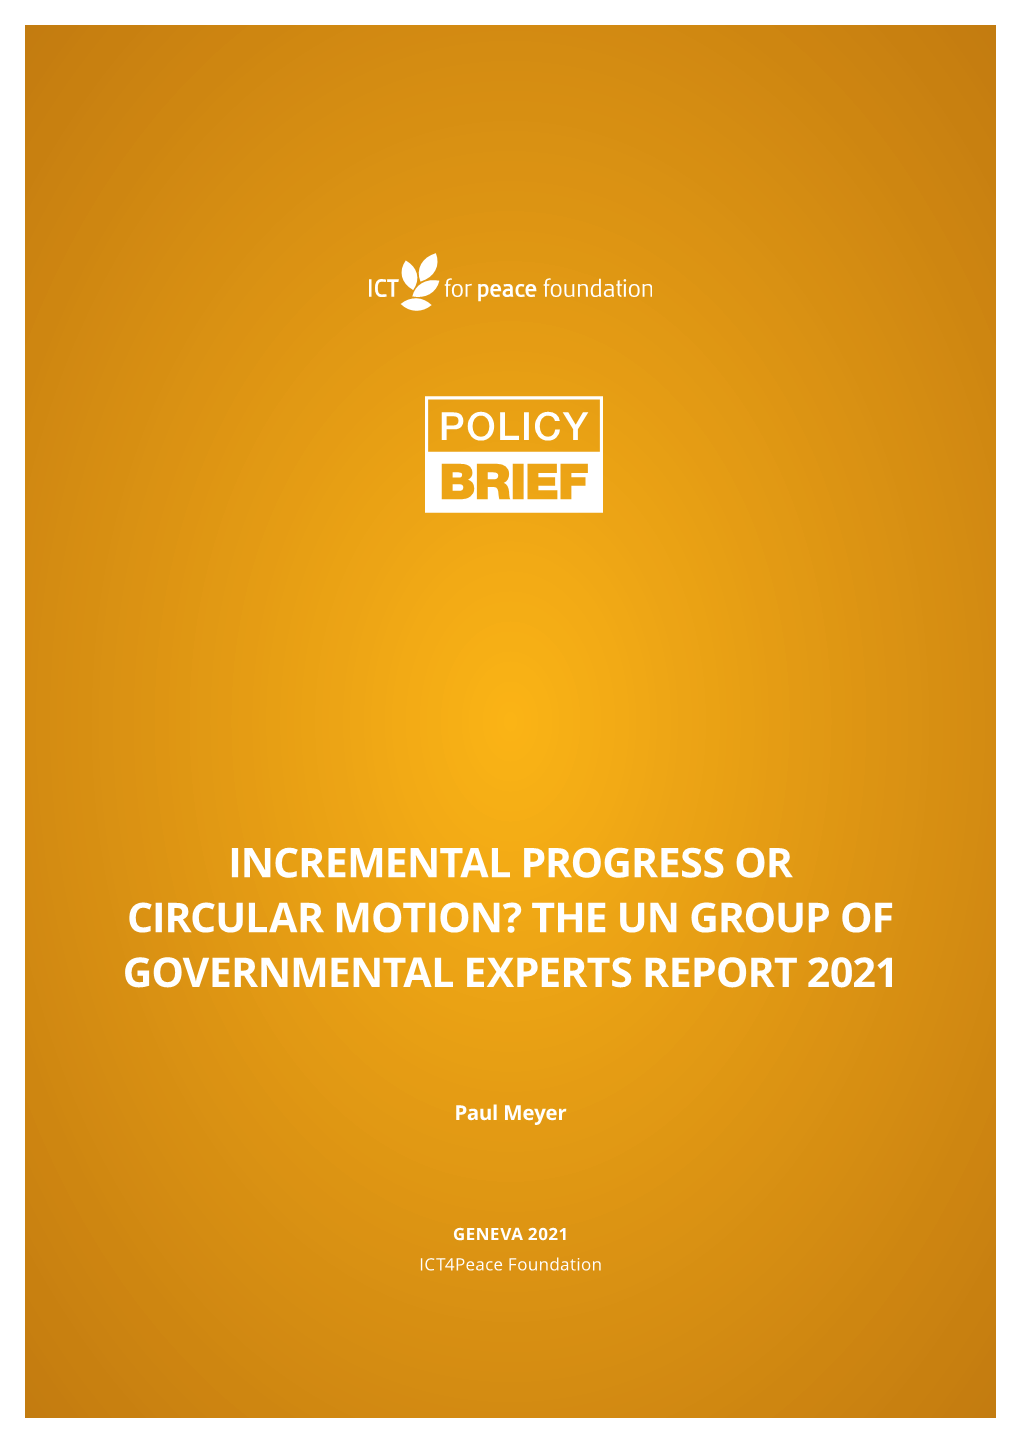 Incremental Progress Or Circular Motion? the Un Group of Governmental Experts Report 2021